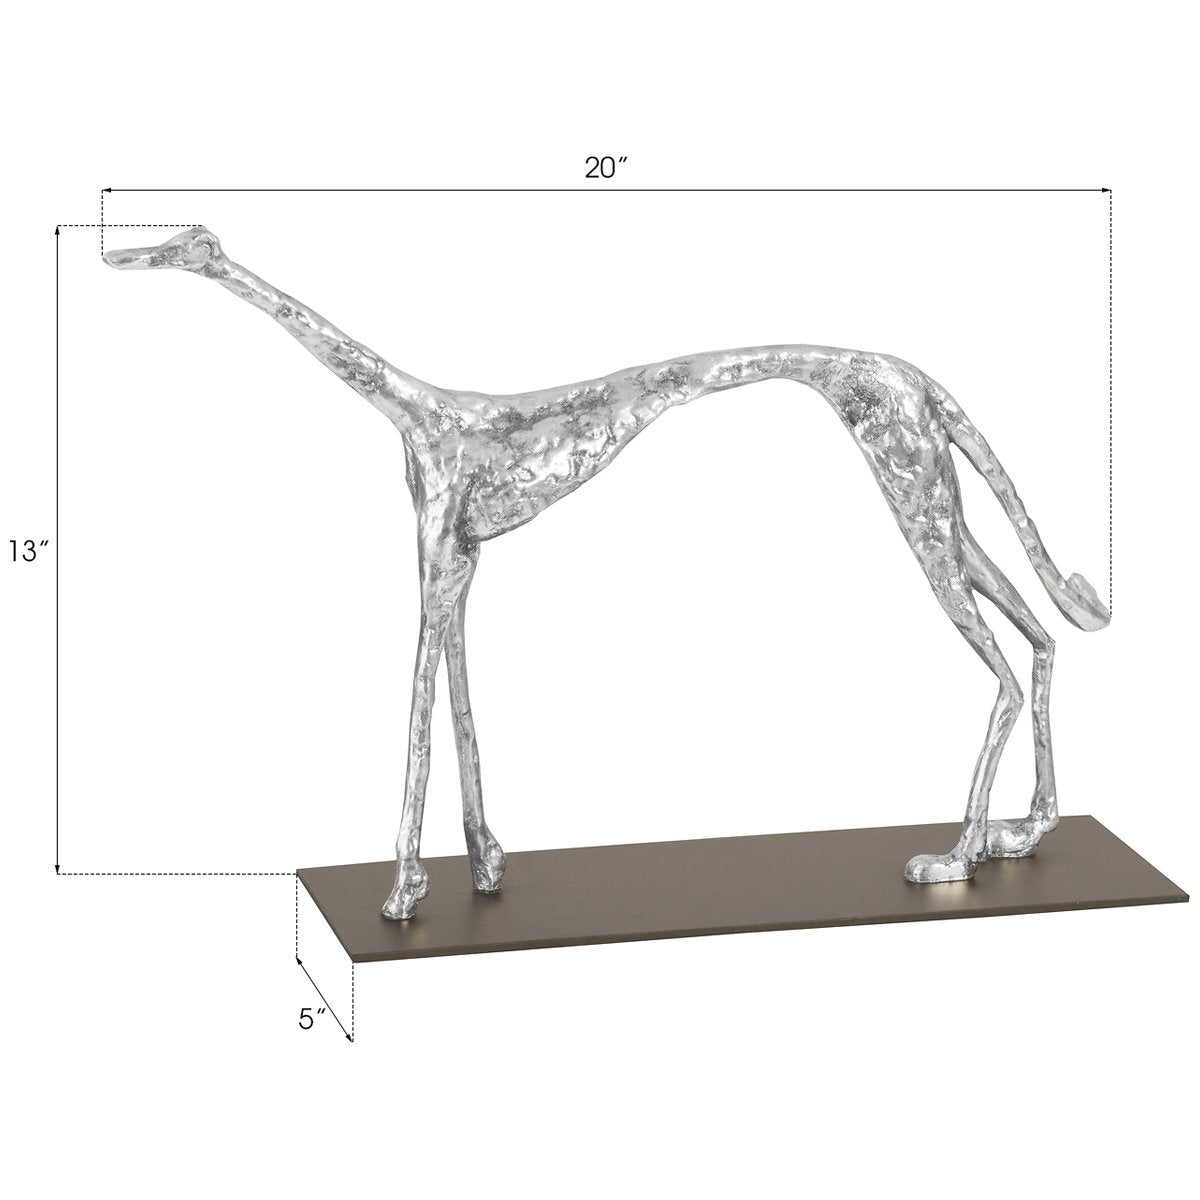 Phillips Collection Greyhound Sculpture on Black Metal Base